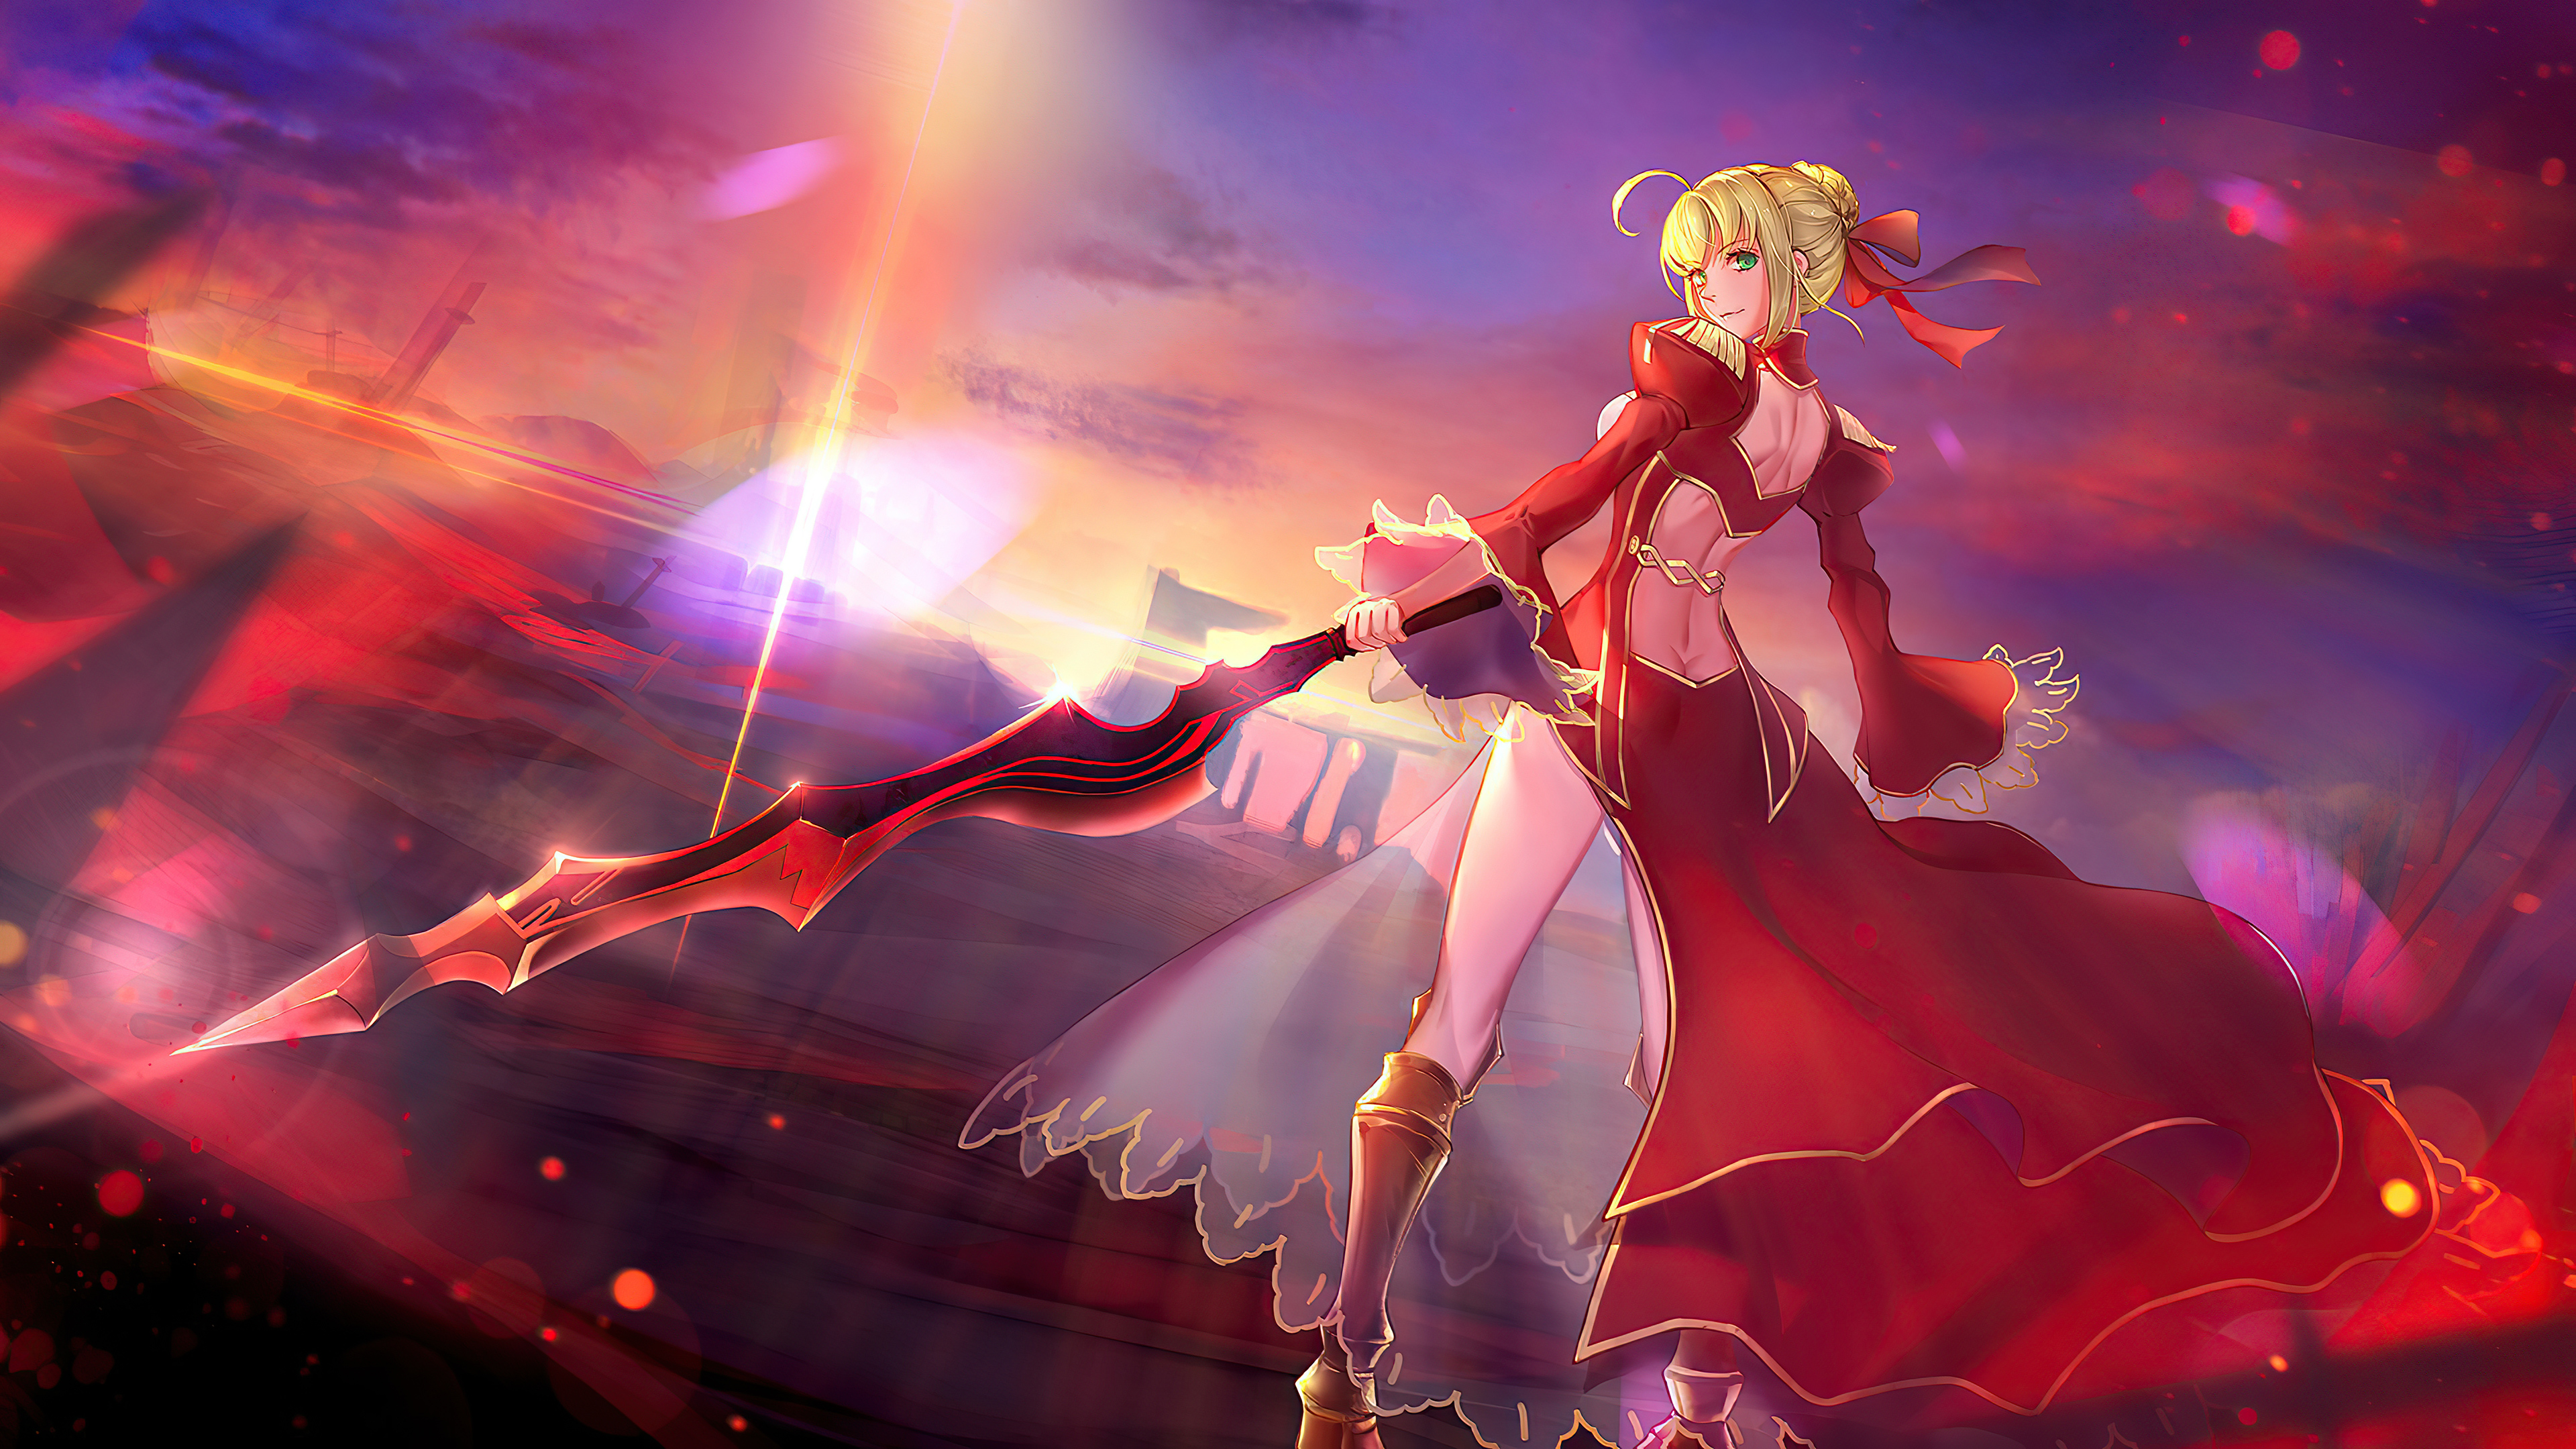 19x1080 Fate Stay Night Anime 4k Laptop Full Hd 1080p Hd 4k Wallpapers Images Backgrounds Photos And Pictures